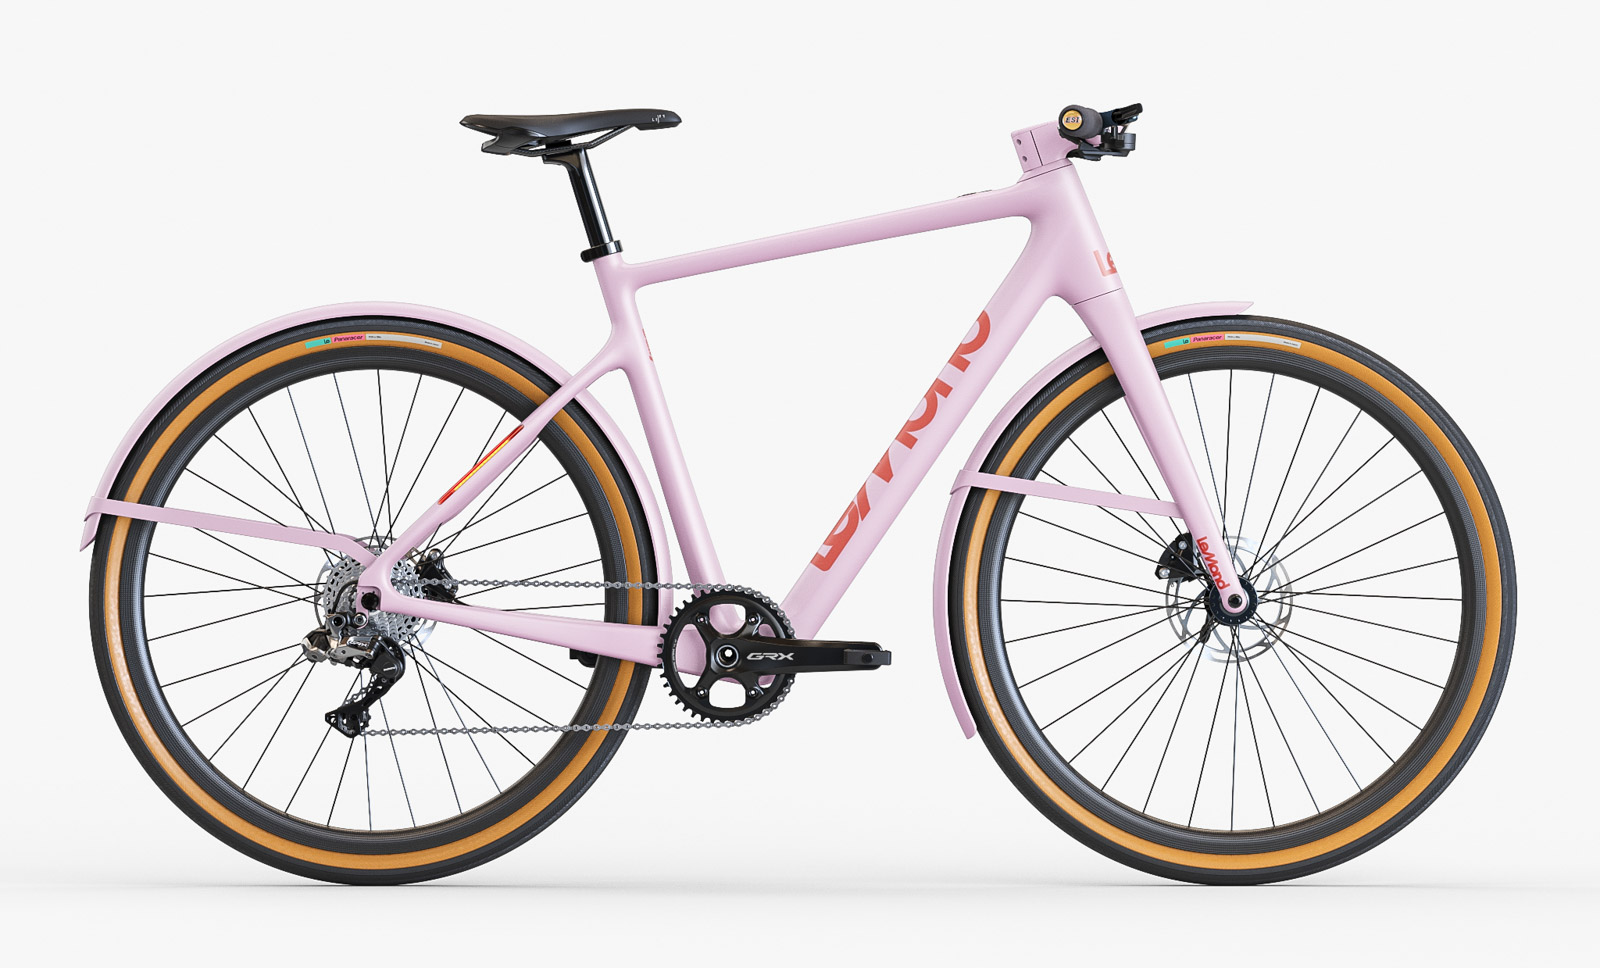 LeMond bikes are back with a surprising new look